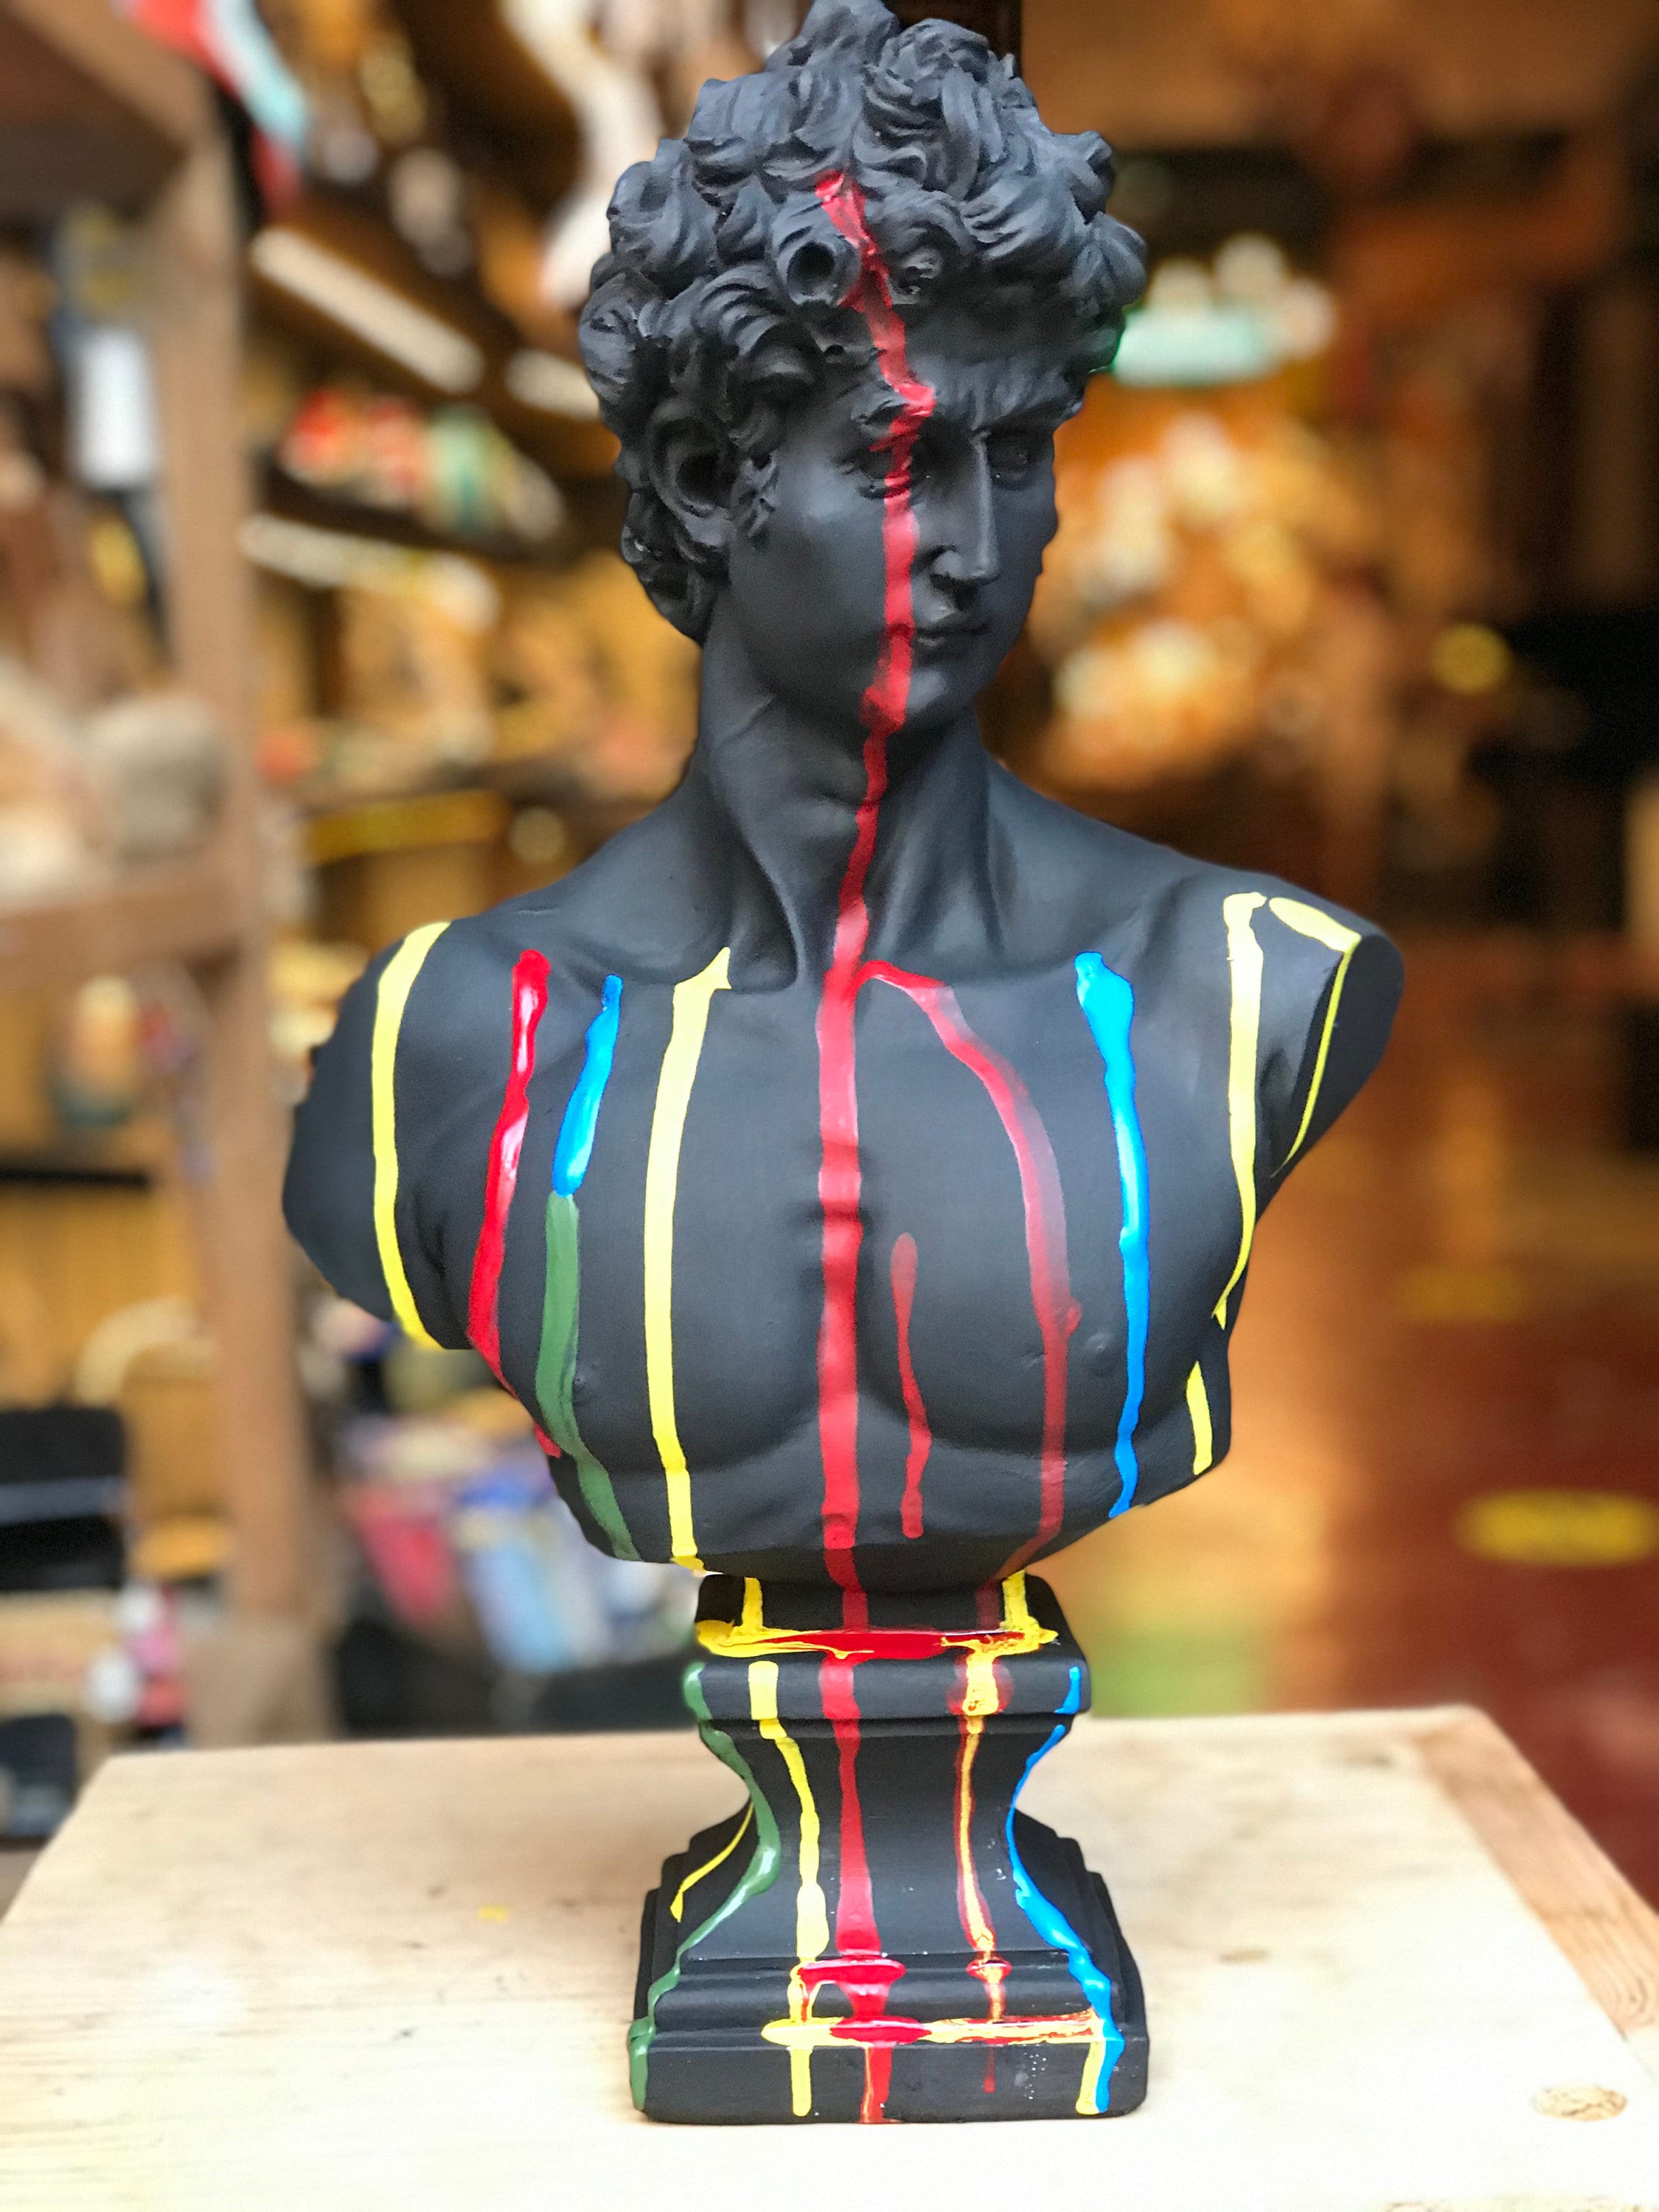 Contemporary Contrast: Large David Bust Sculpture with Colorful Strips